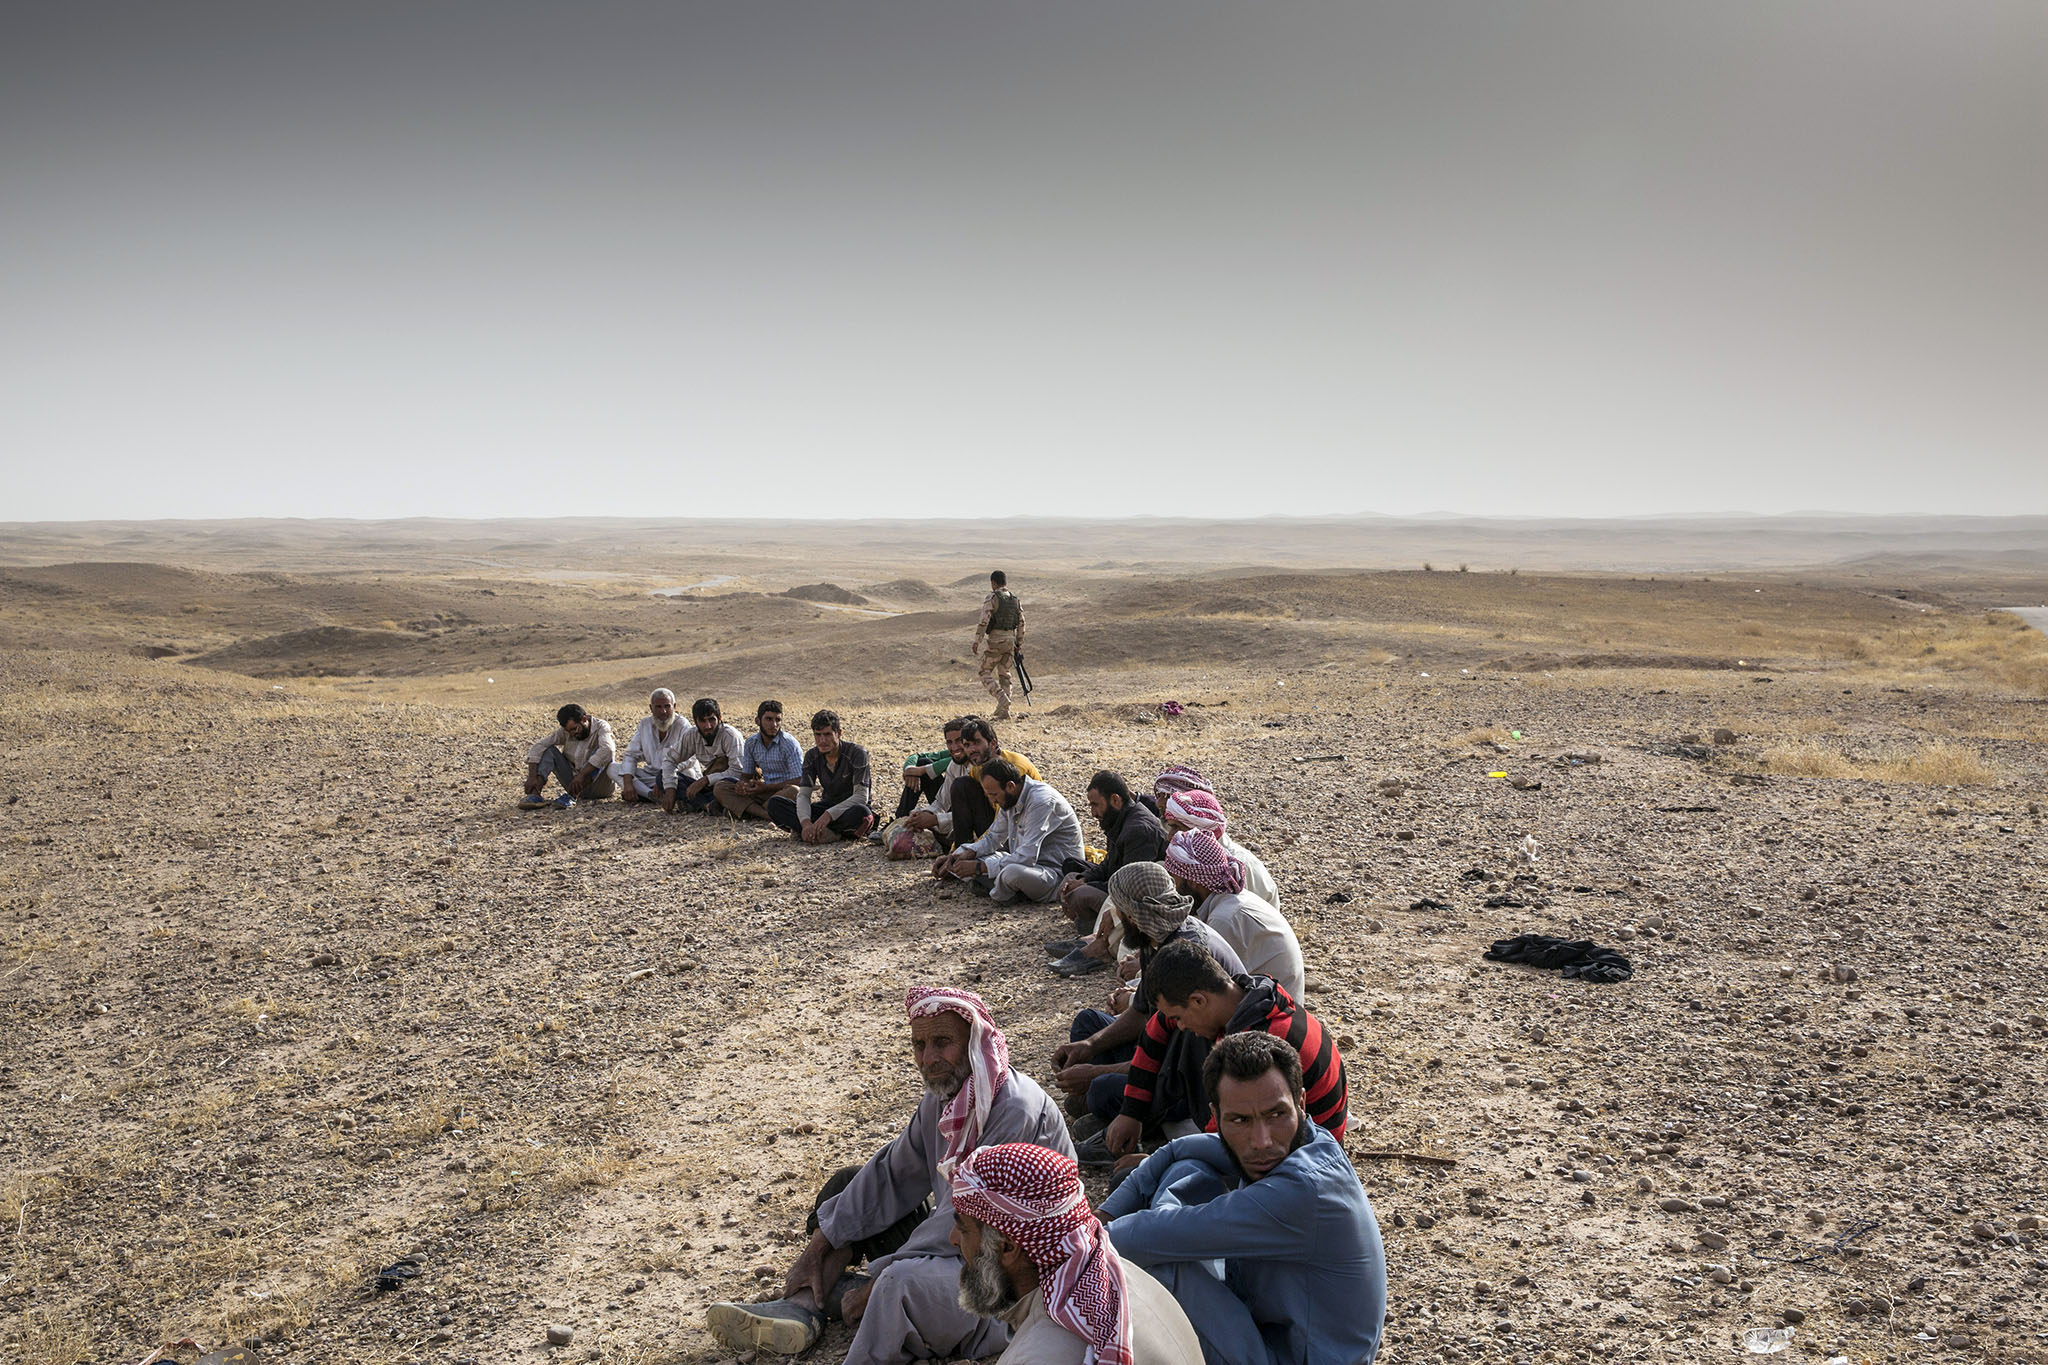 Displaced people wait to be cleared for entry to Kirkuk, Iraq, Oct. 1, 2017. (Ivor Prickett/The New York Times)